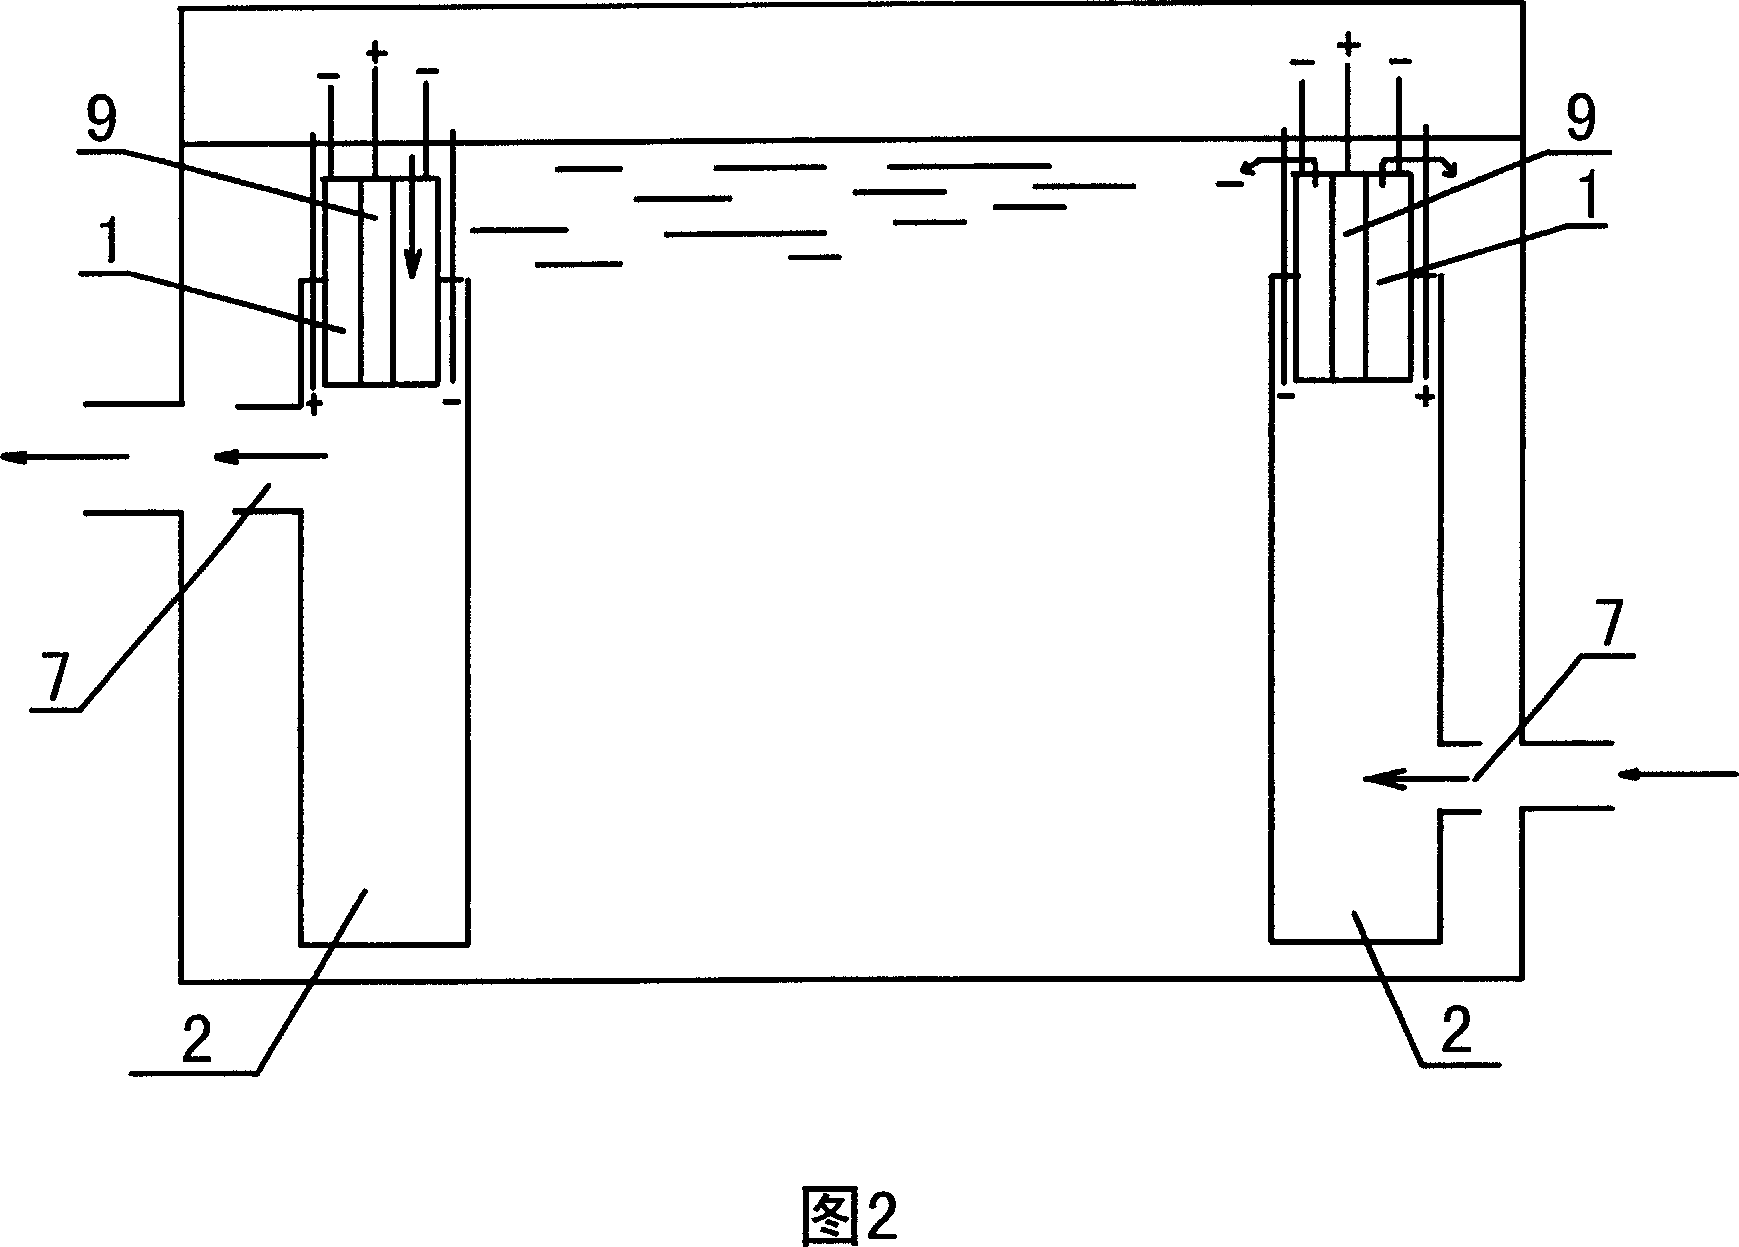 Ionic rod water treater in water pool